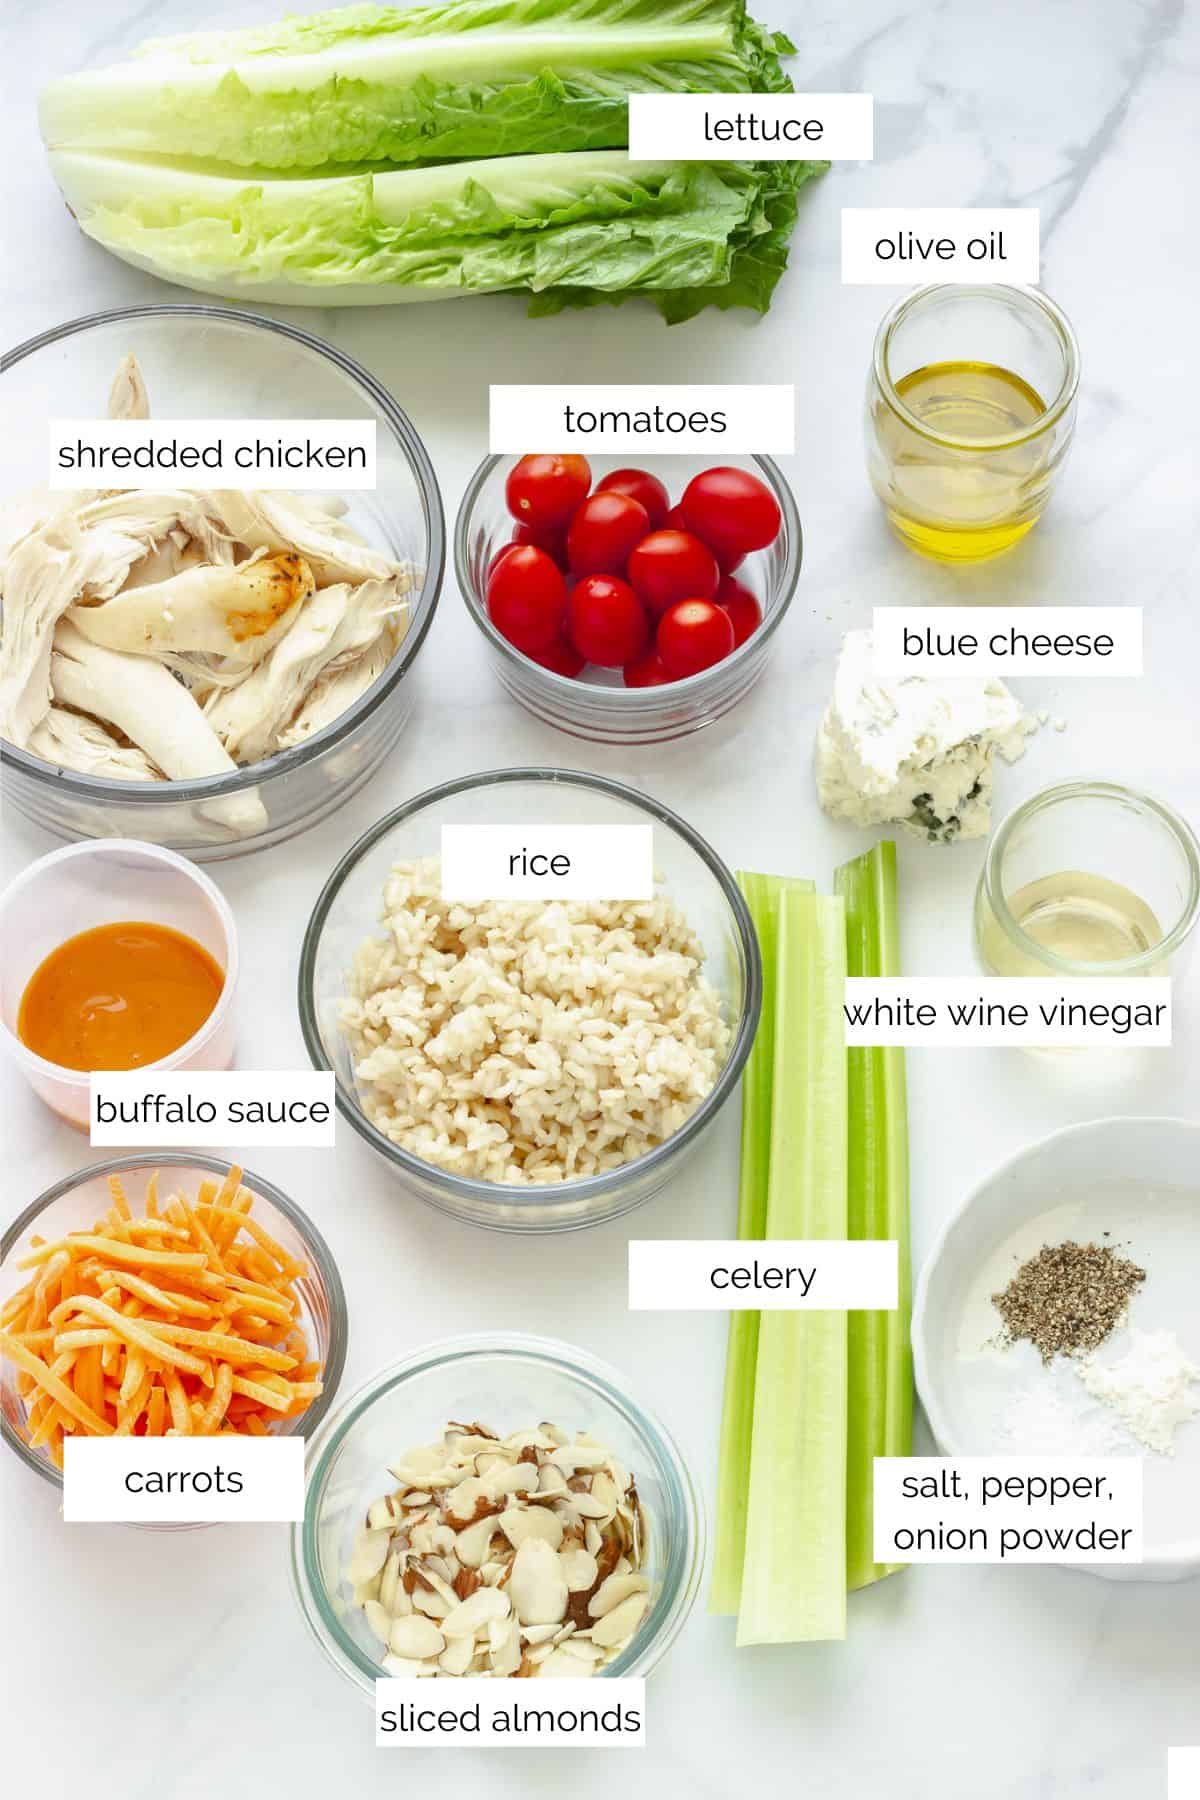 Ingredients for Buffalo chicken and rice bowls.